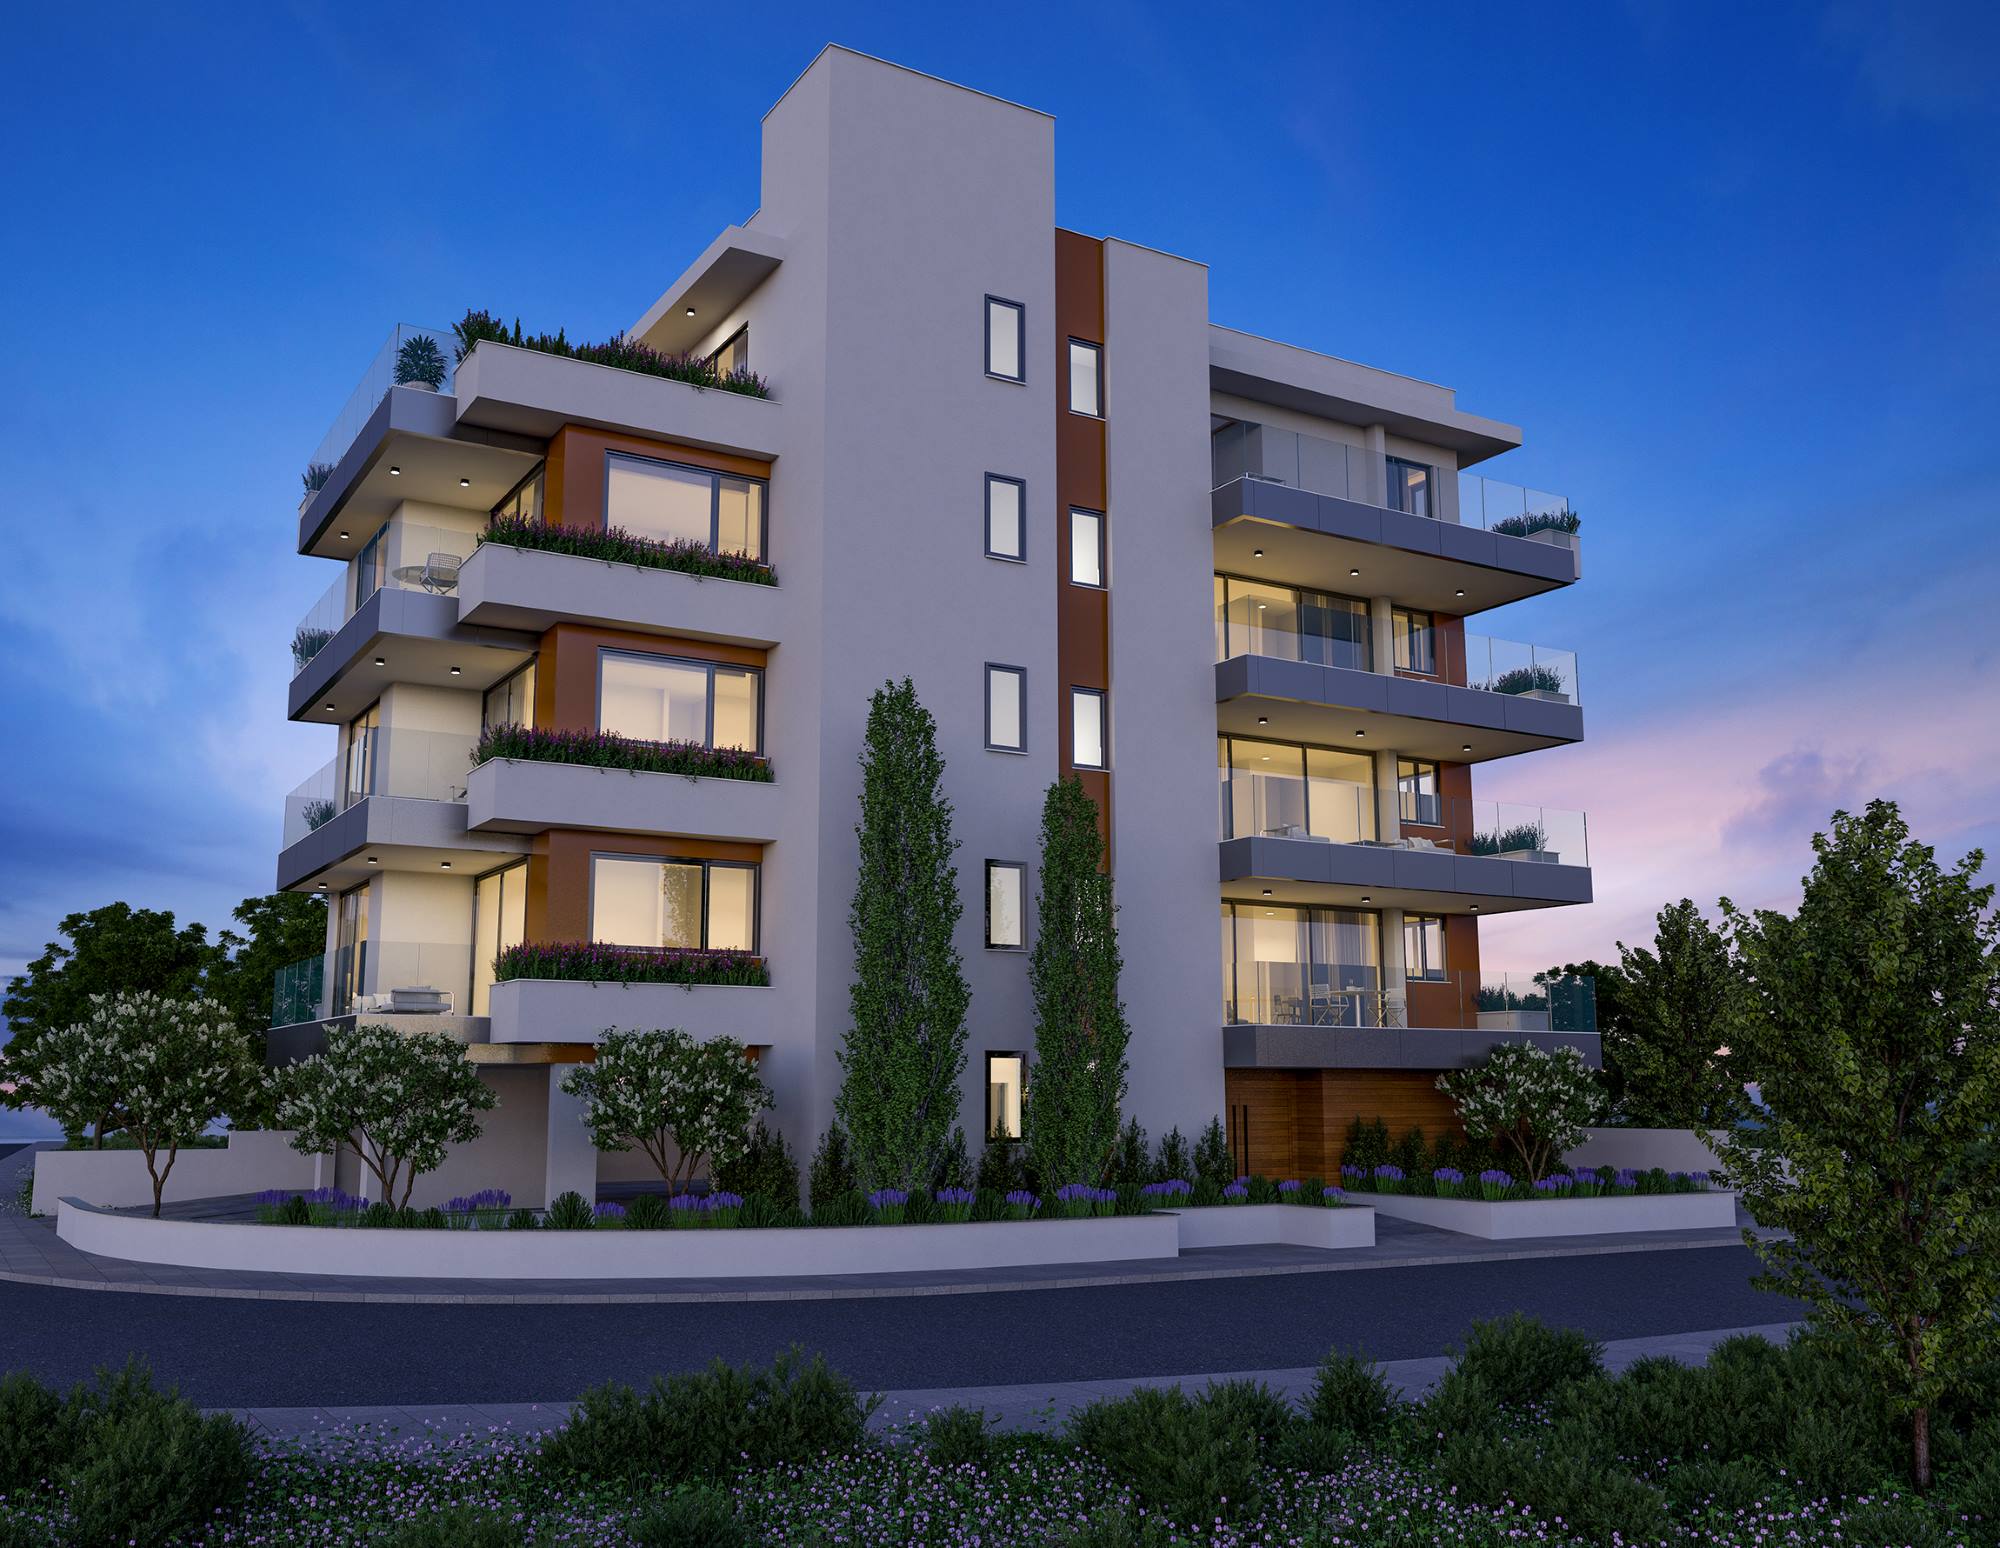 2 Bedroom Apartment for Sale in Larnaca – New Marina